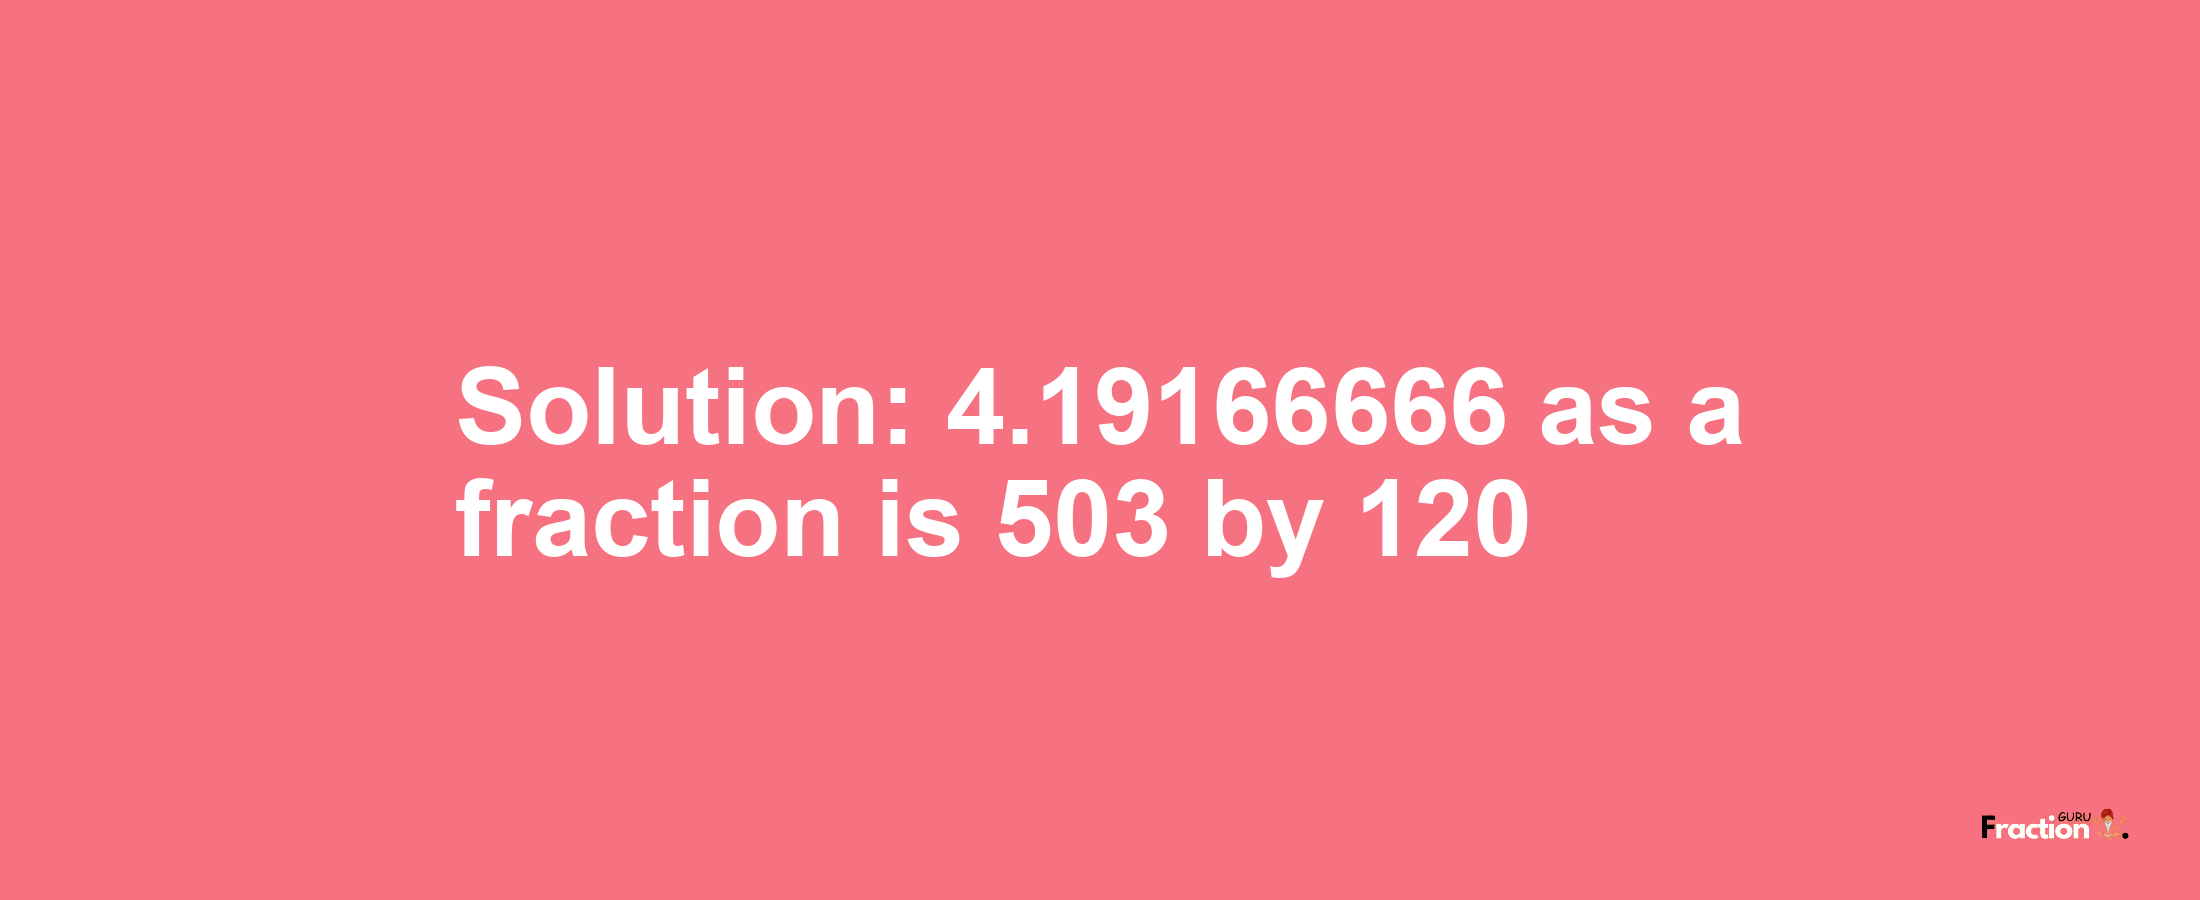 Solution:4.19166666 as a fraction is 503/120